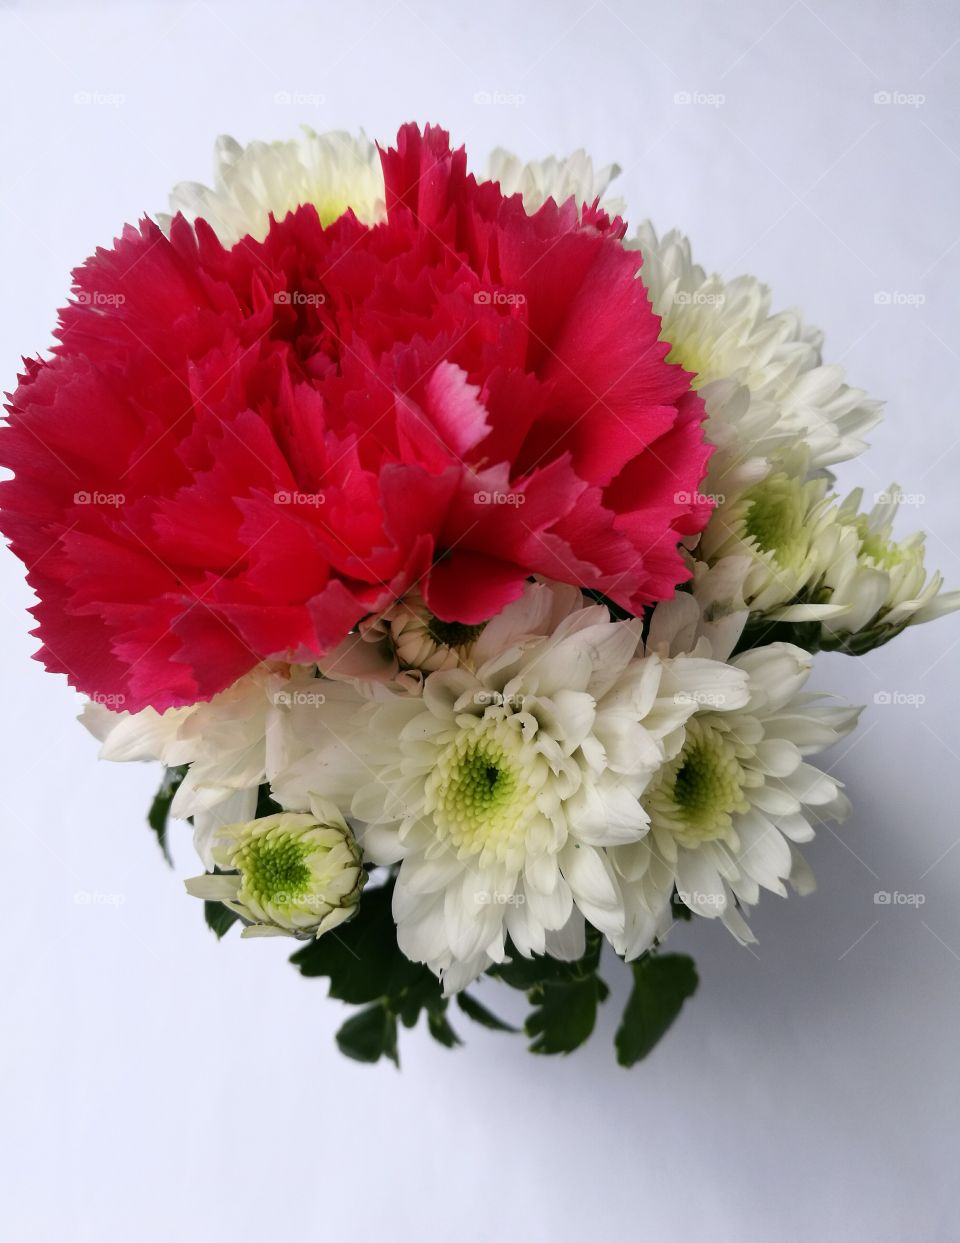 red carnation and chrysanthemum flowers on white background